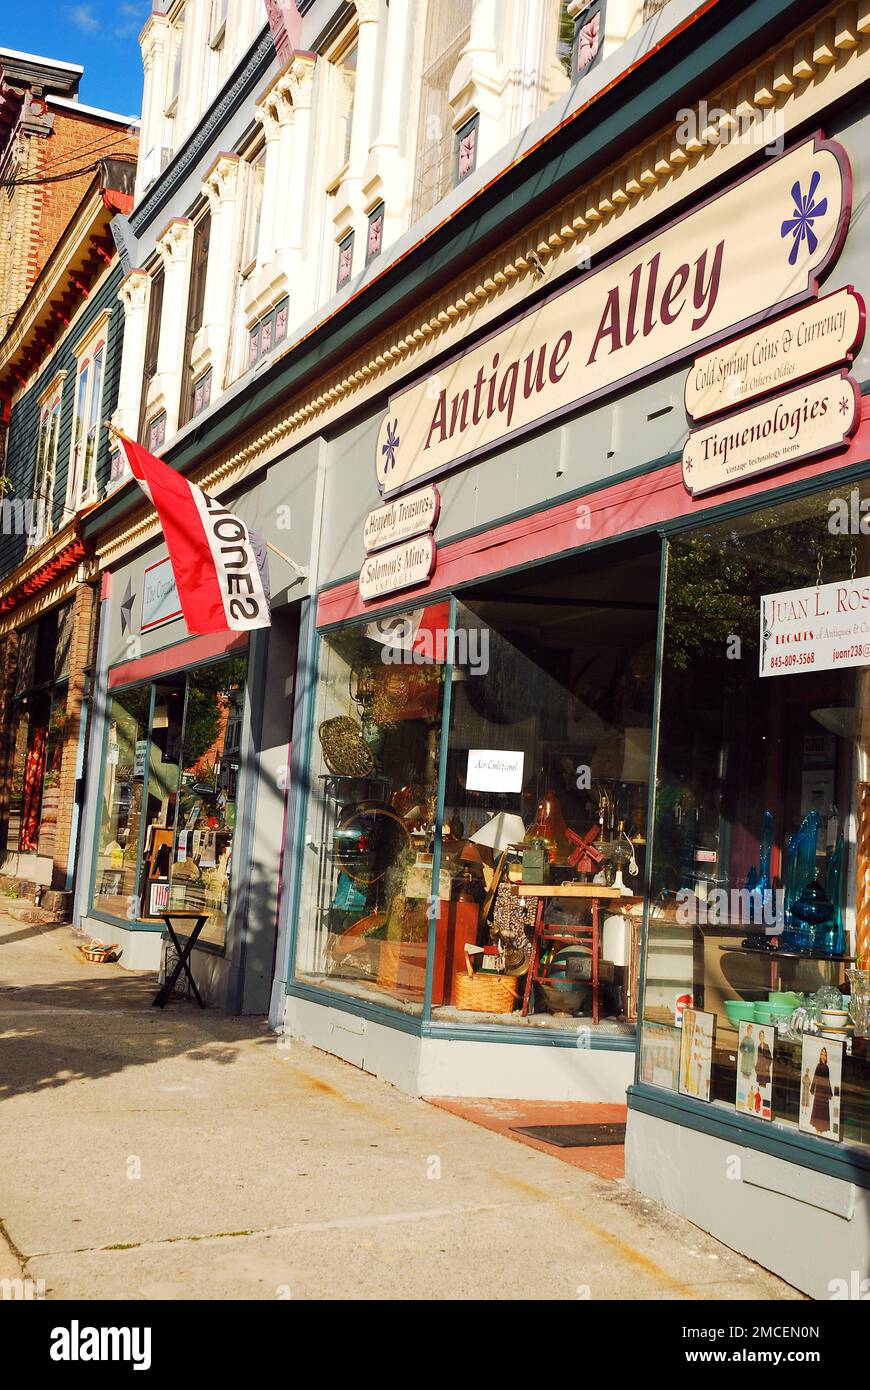 Antique Alley, a charming store that is one of many independent businesses in downtown Cold Spring, NY Stock Photo